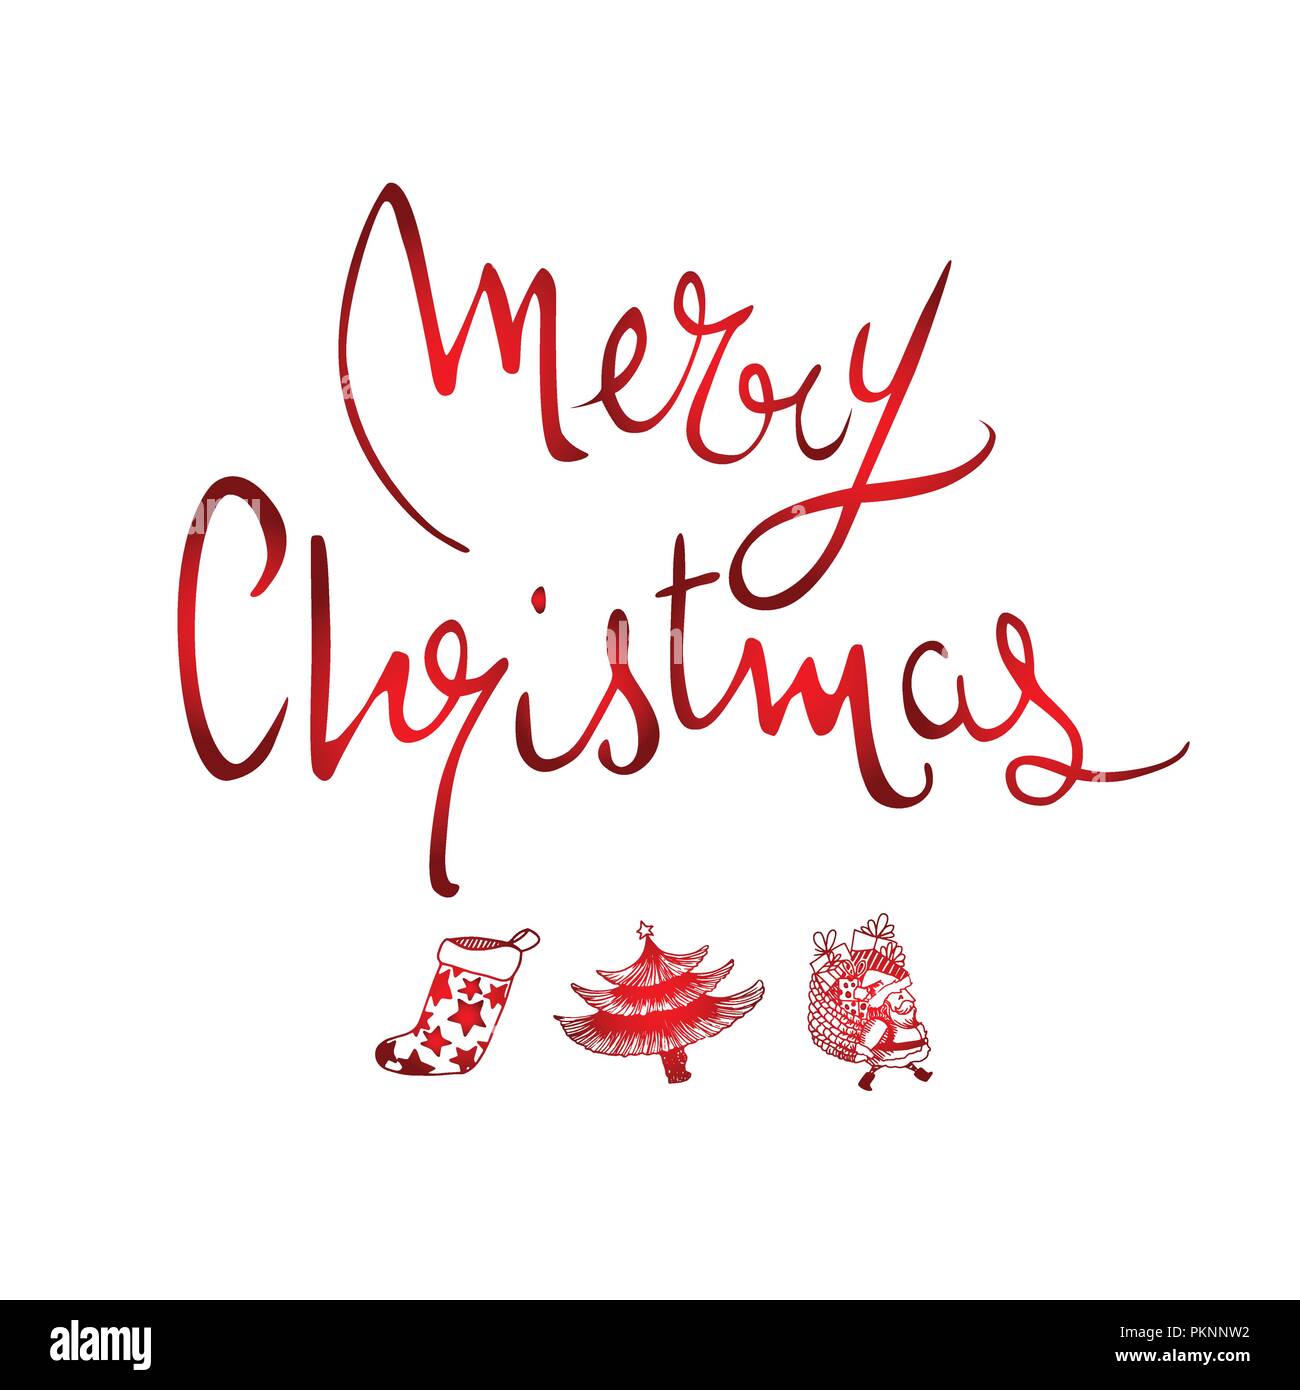 Sweet Merry Christmas card illustrated with doodles Stock Vector